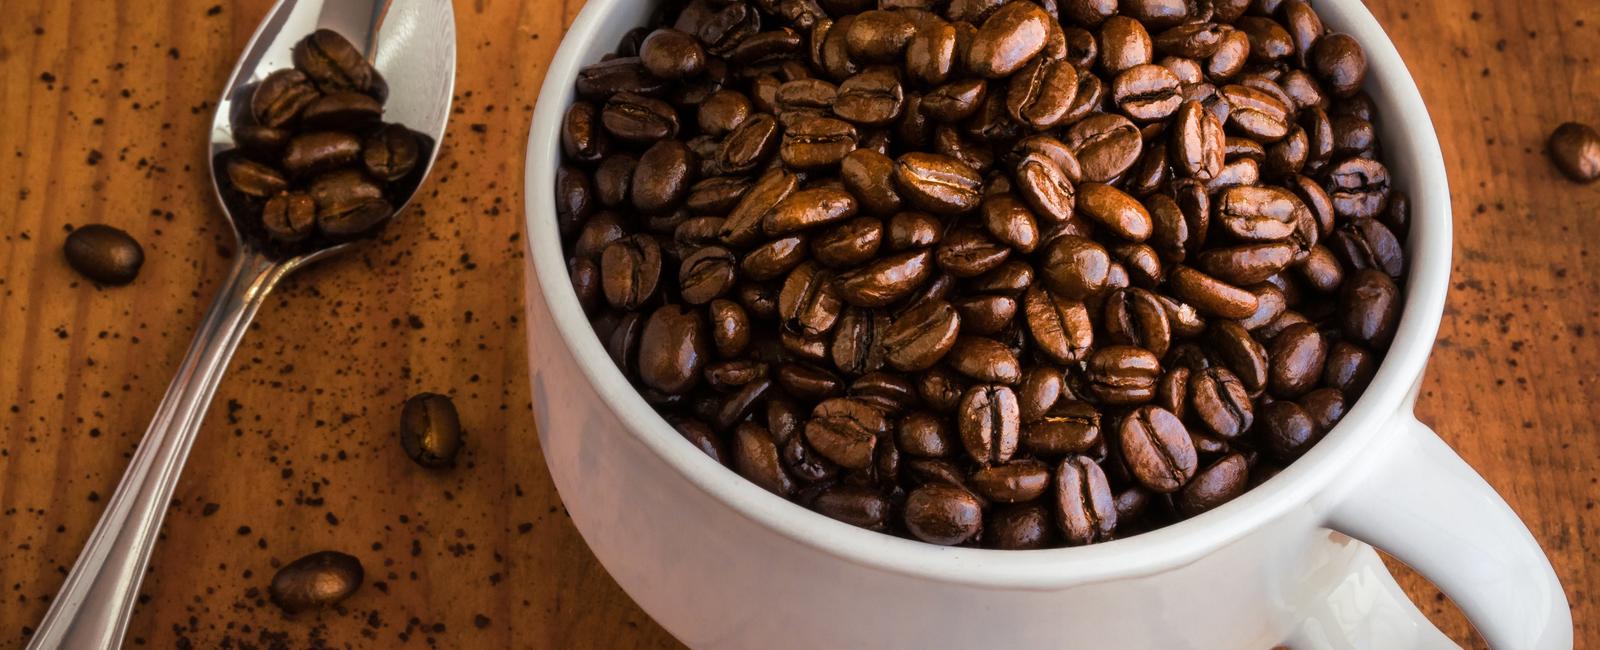 If a coffee bean is darker will its caffeine content be higher or lower lower